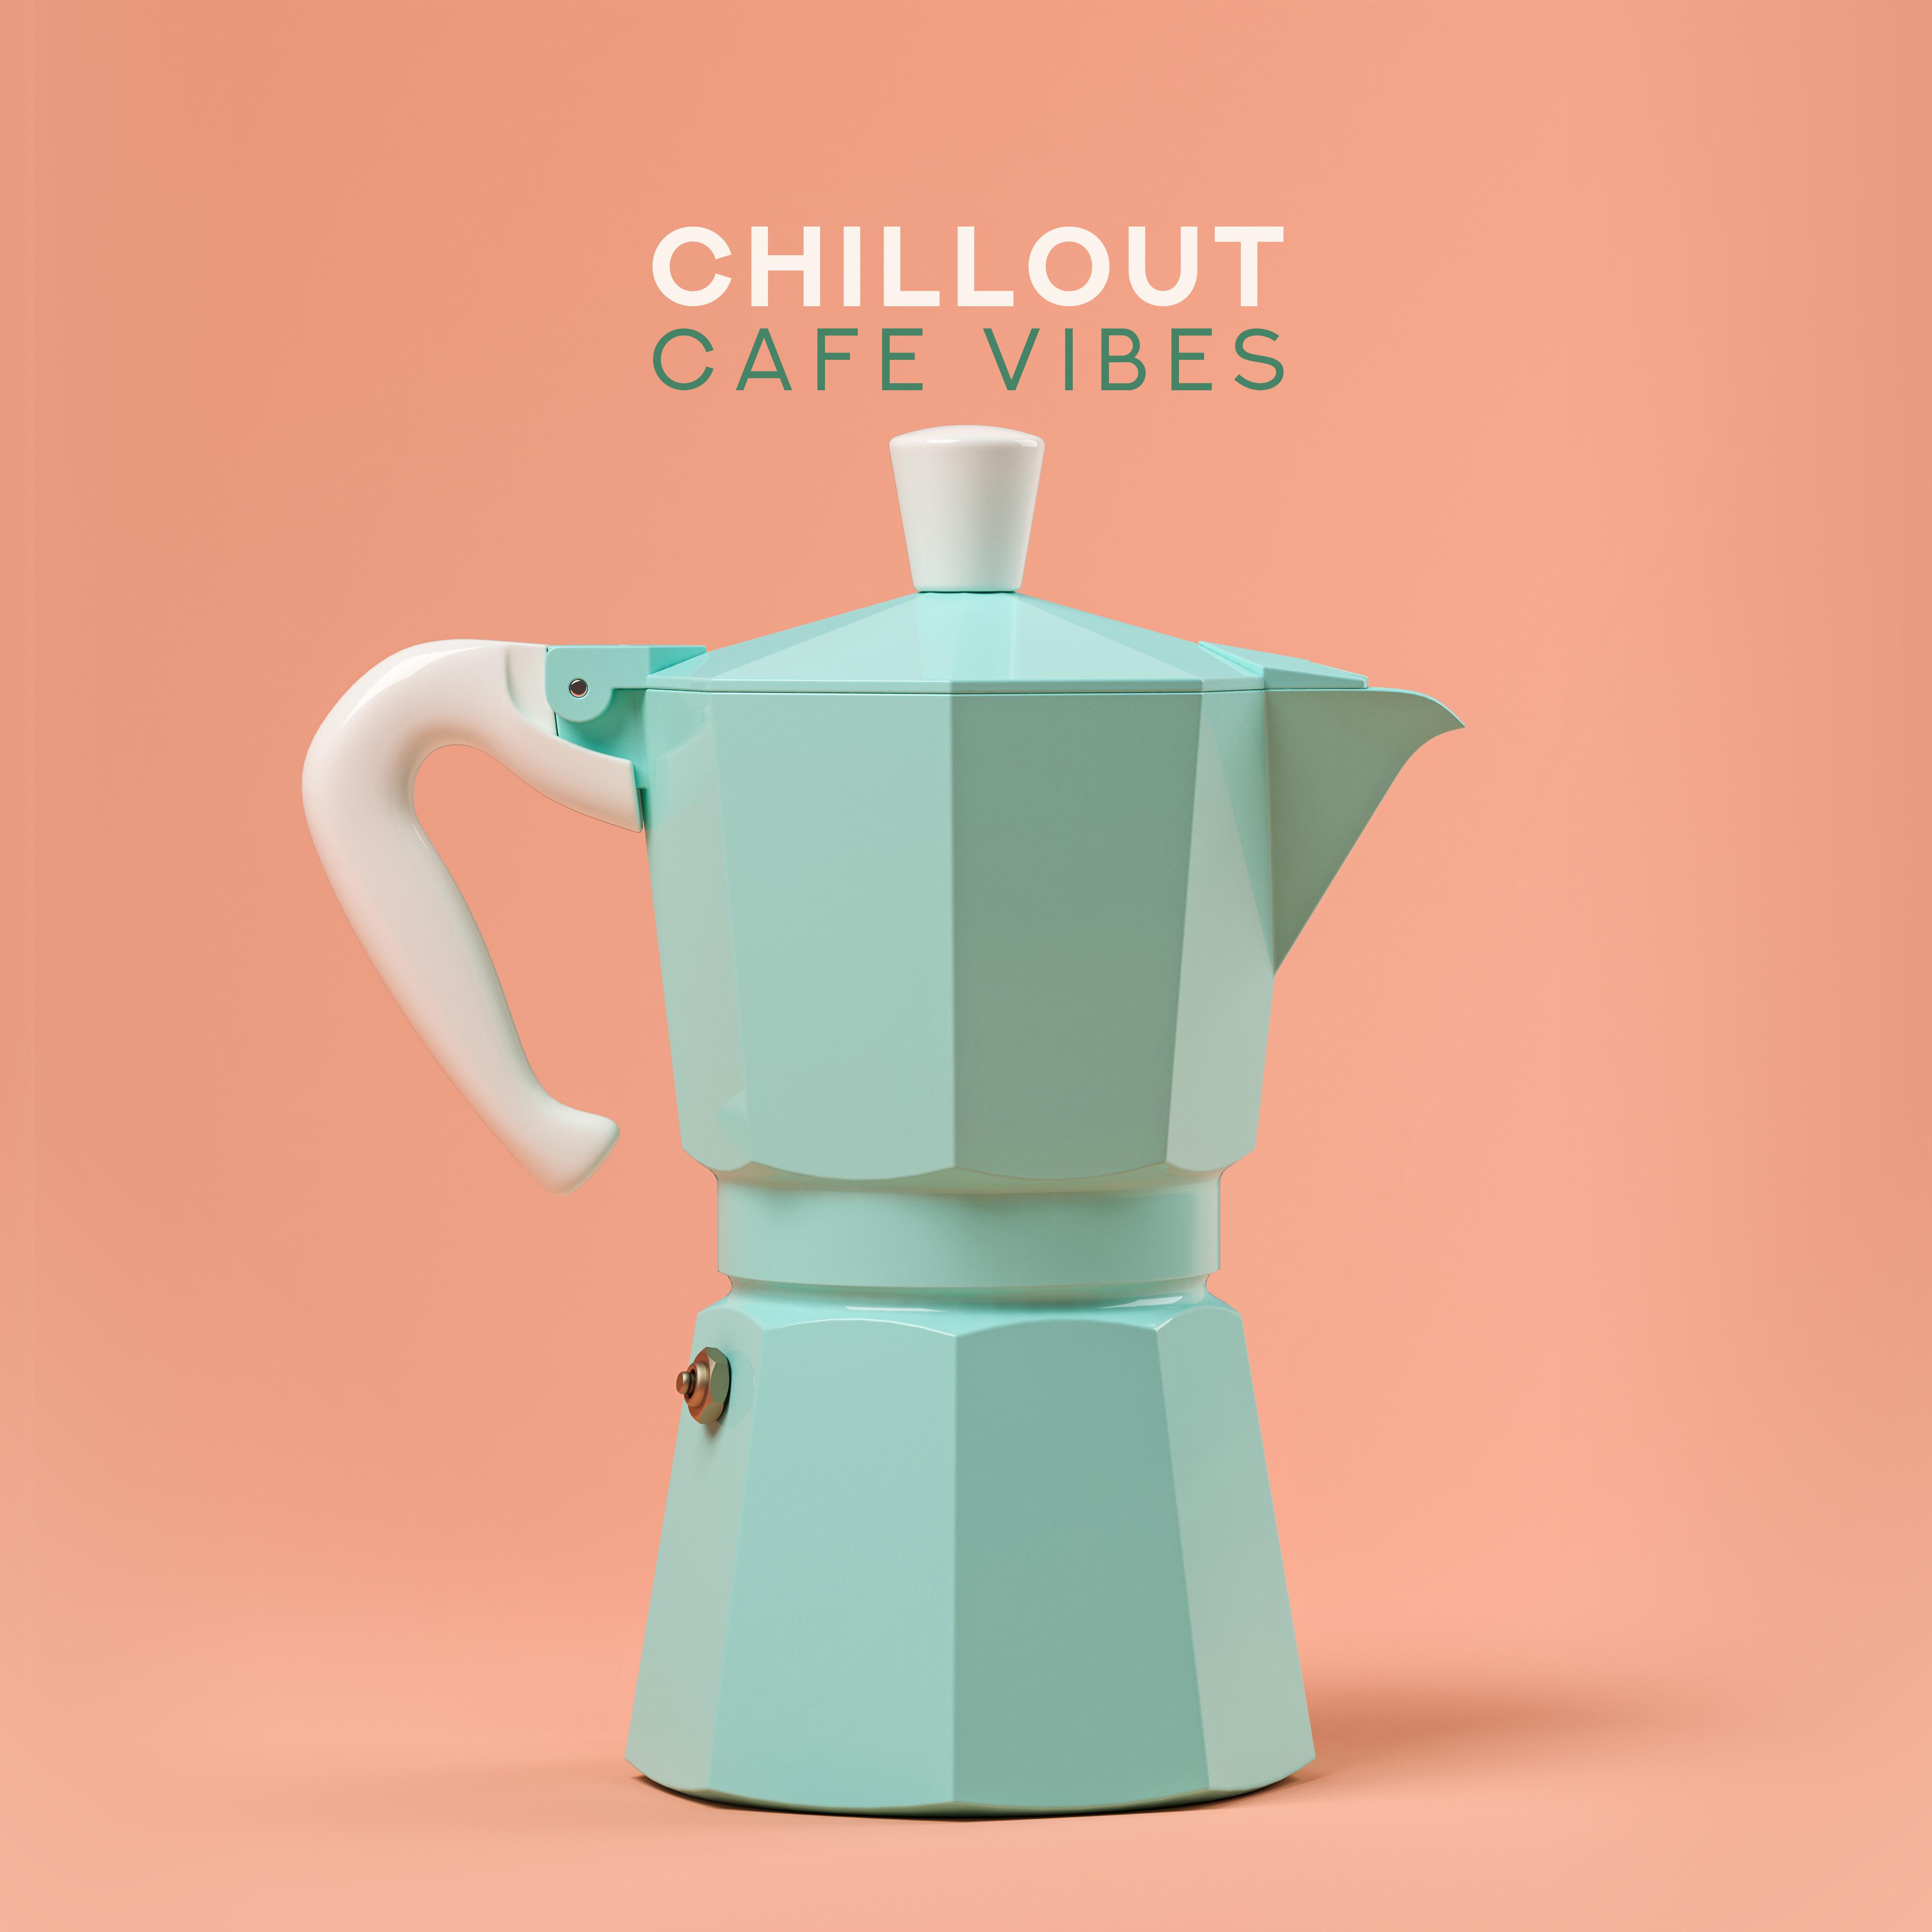 Chillout Cafe Vibes: Smooth Electronic Music for Relaxation with Coffee & Friends